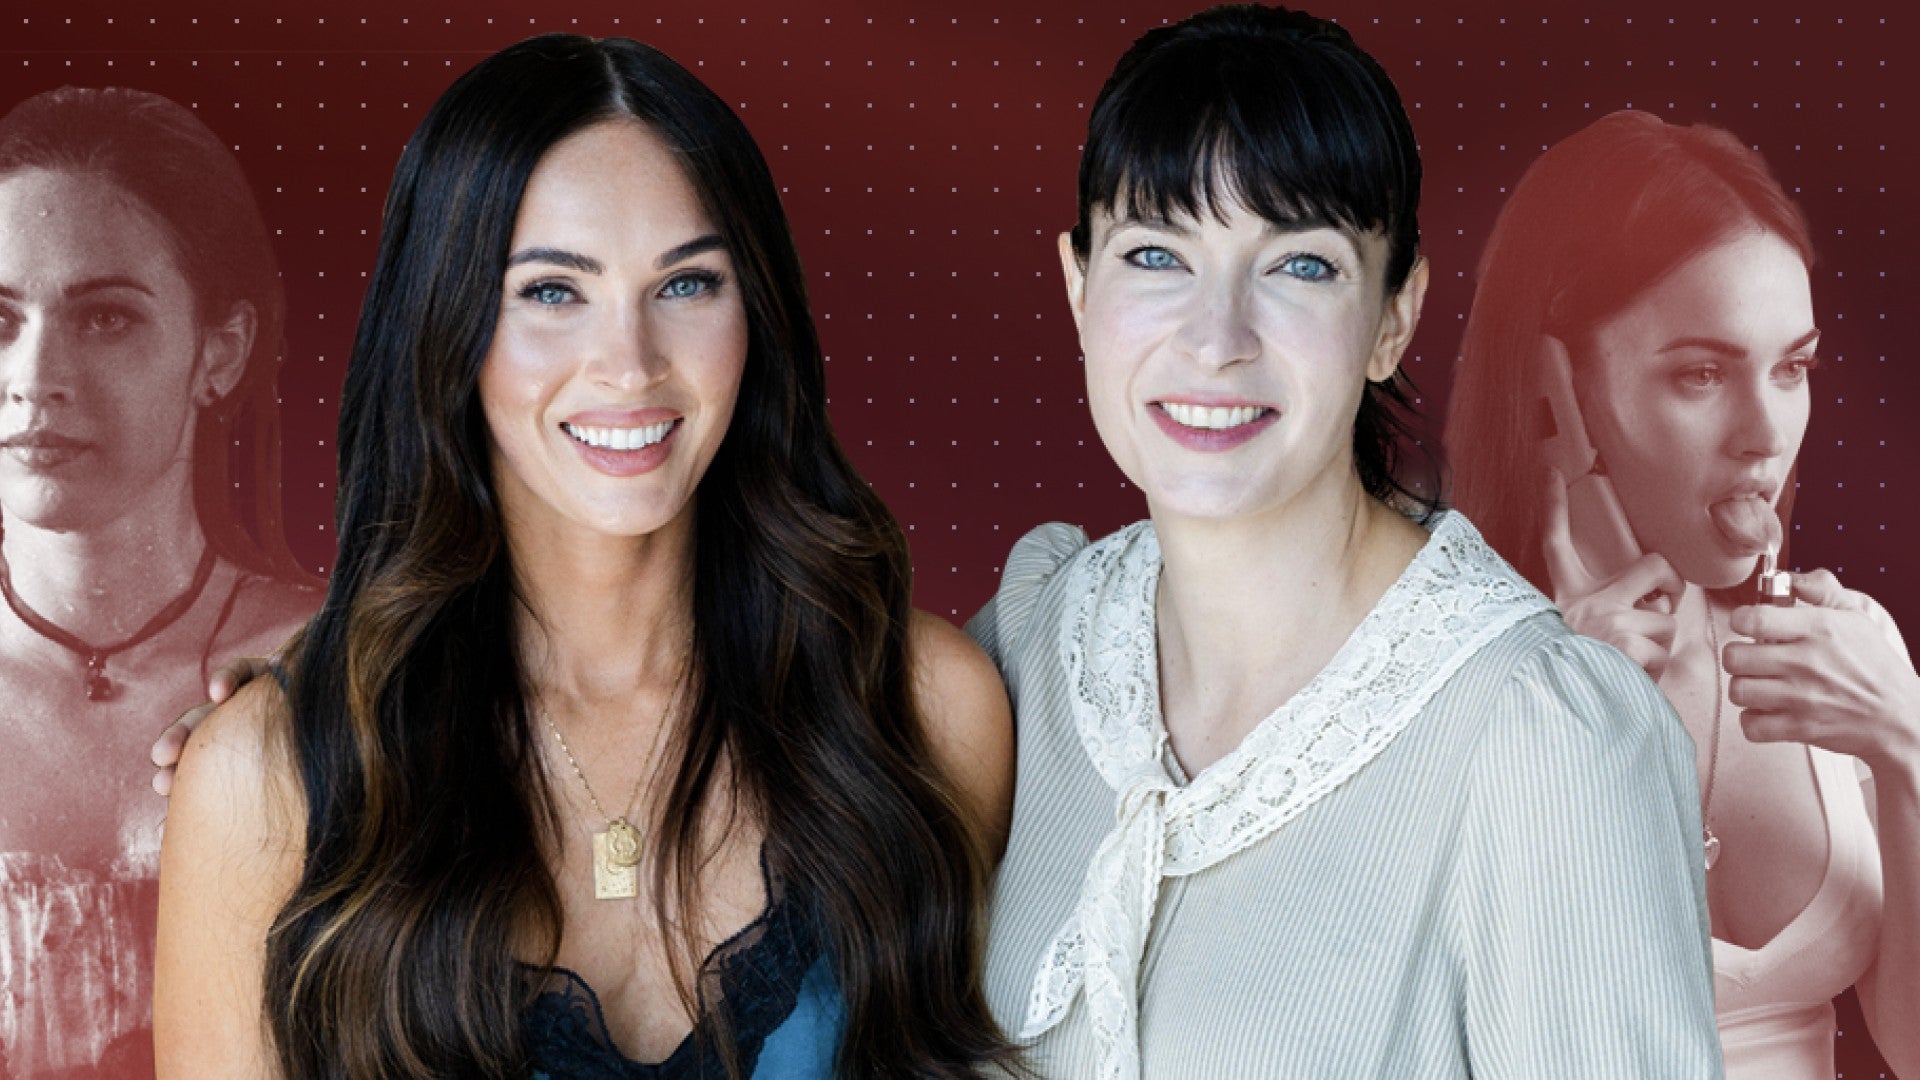 Megan Fox Opens Up About Her Darkest Time In Hollywood And How